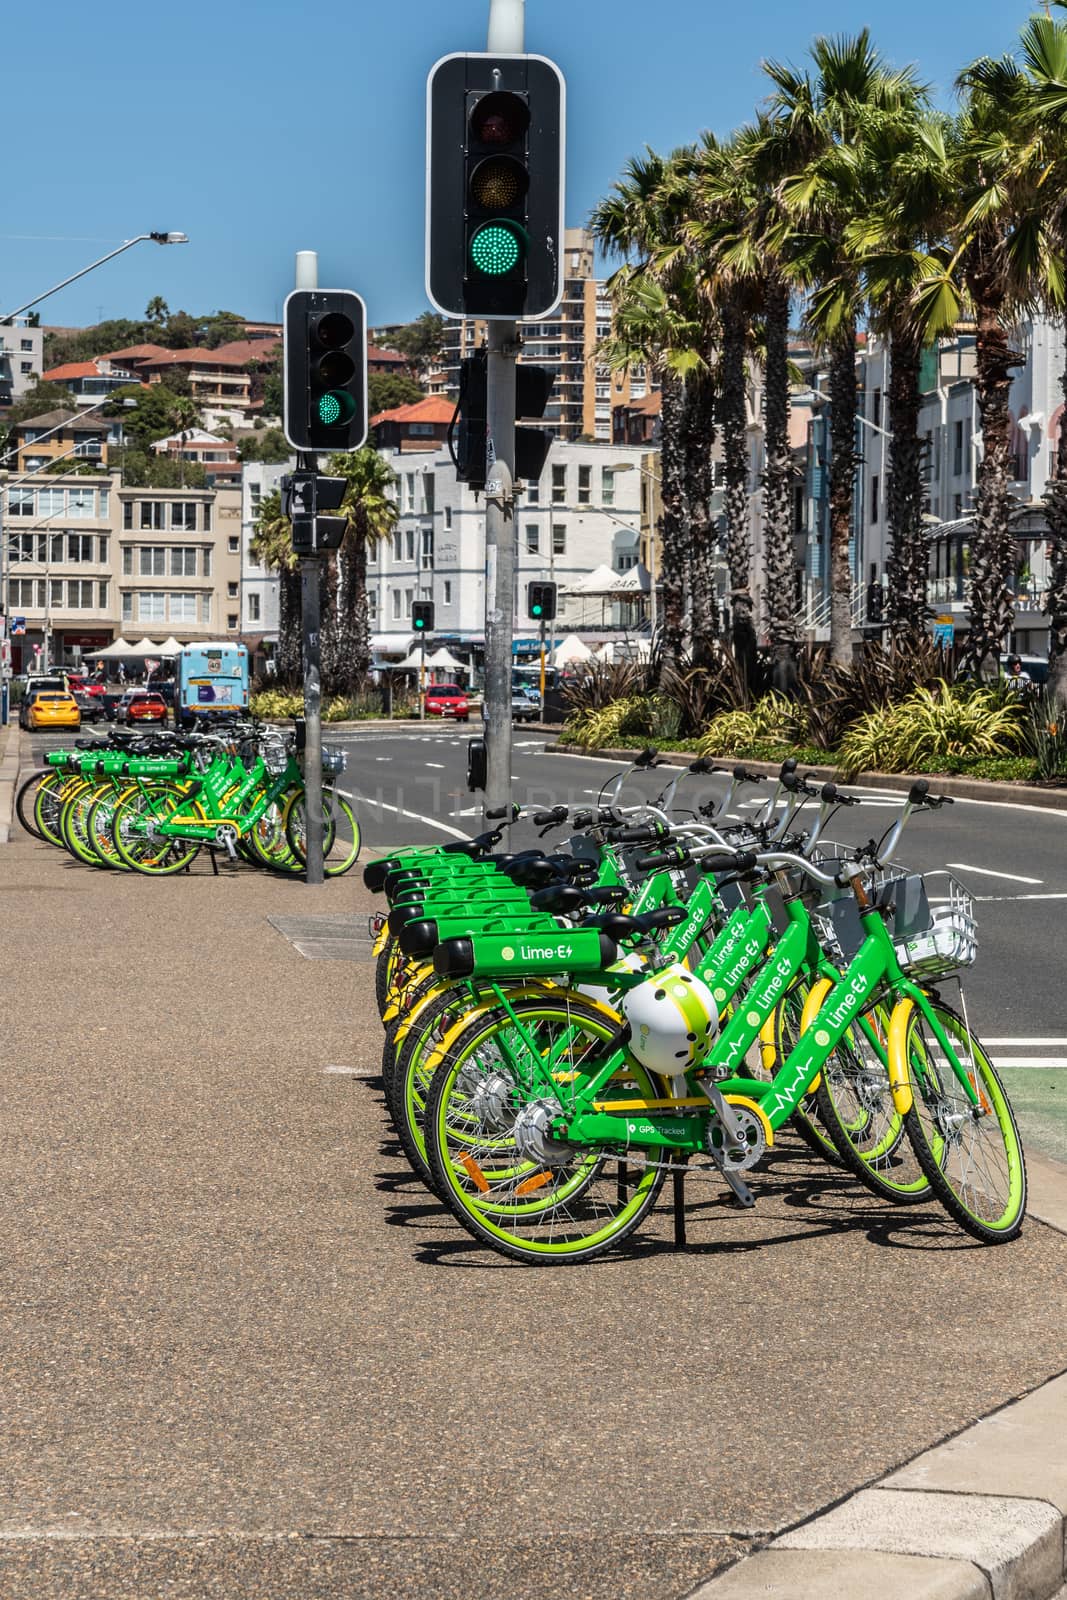 Line of Lime E-bicycles stationed along Bondi beach, Sydney Aust by Claudine